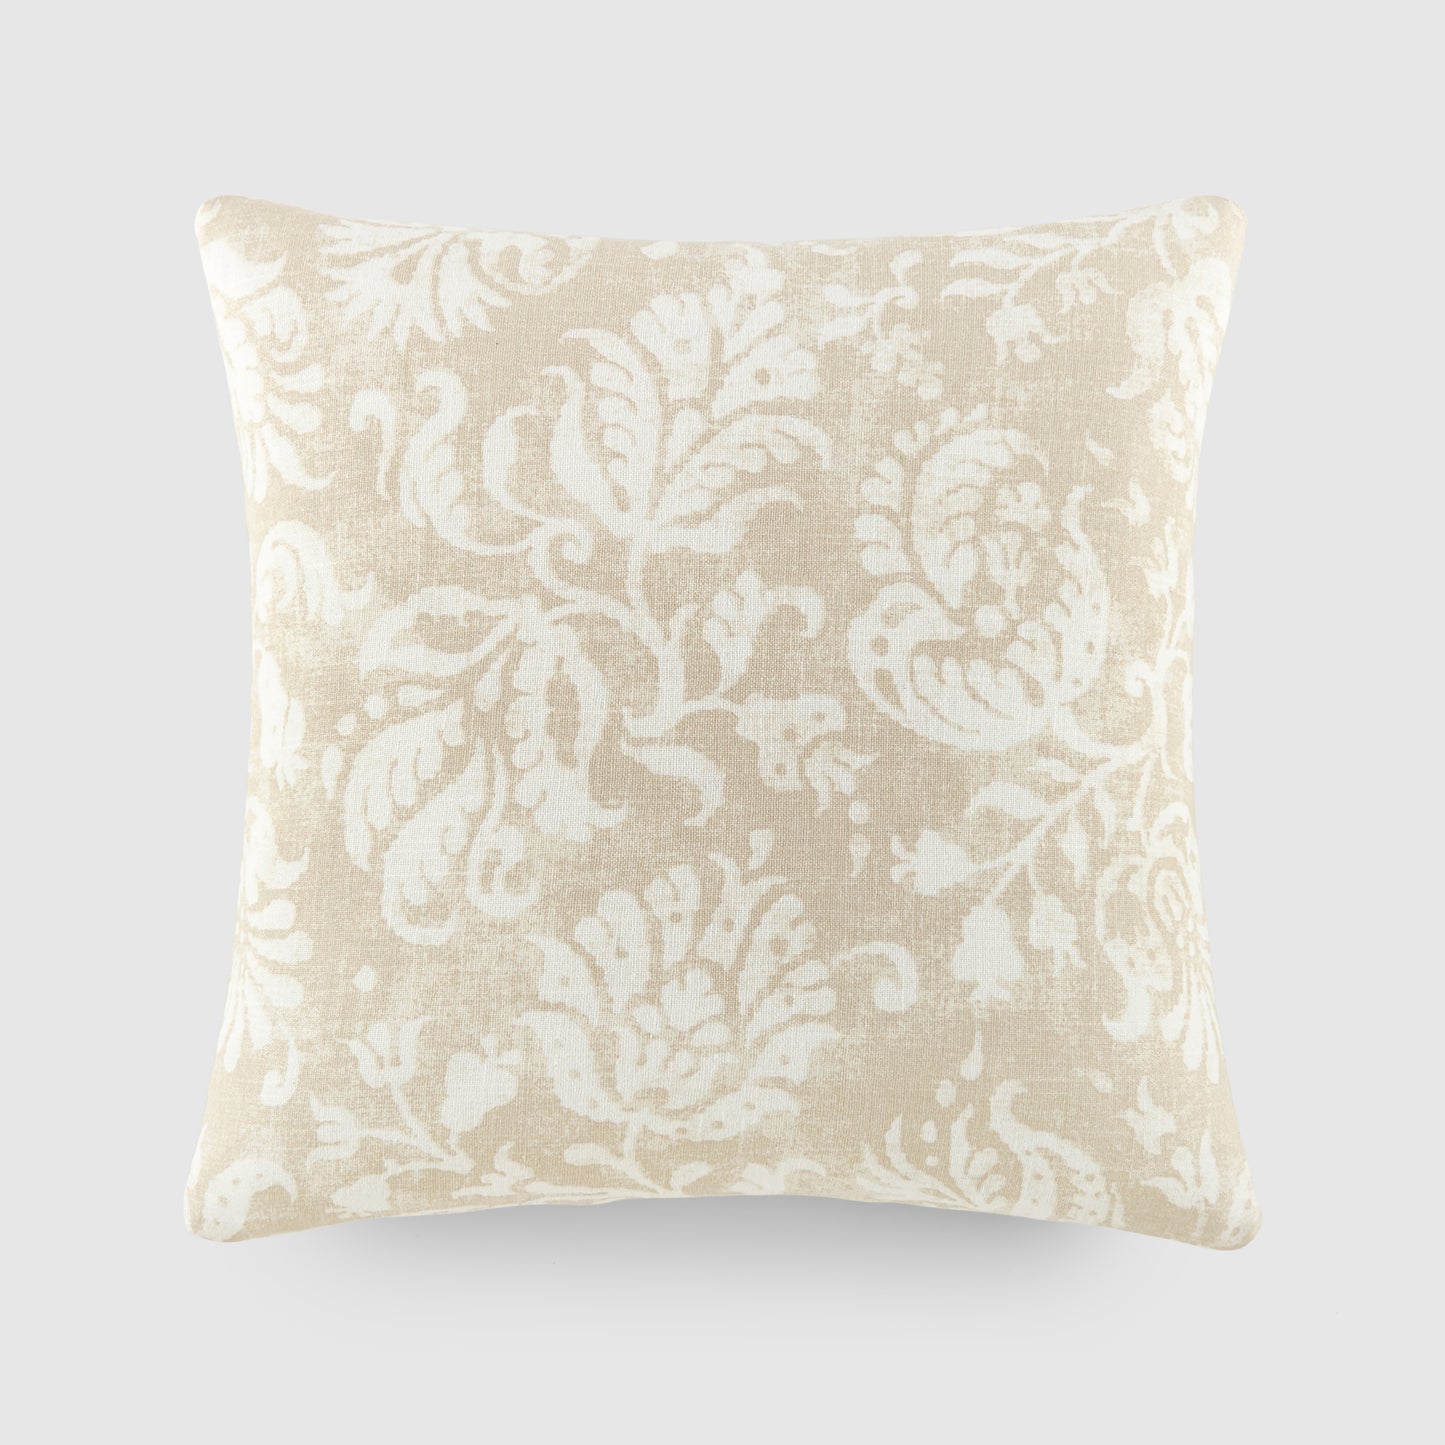 Elegant Patterns Cotton Decor Throw Pillow in Distressed Floral